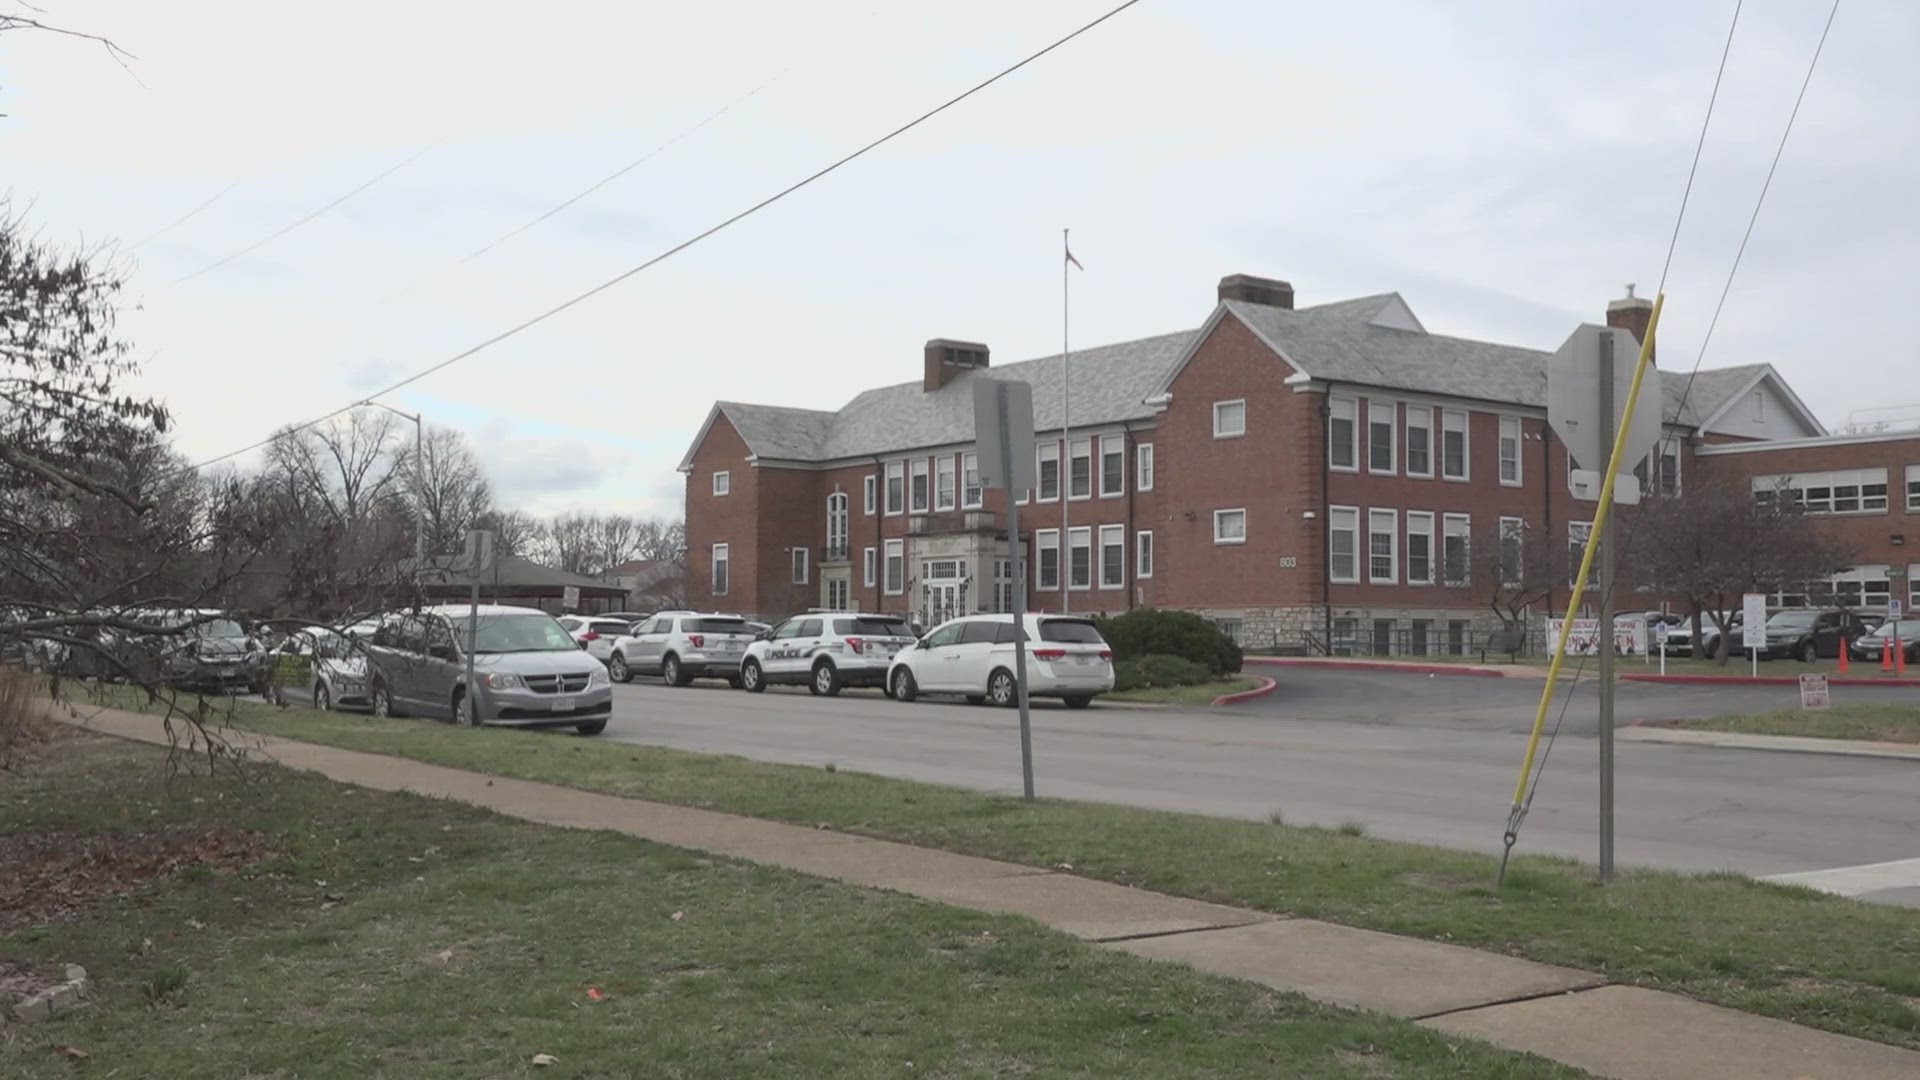 Upset parents in Kirkwood say a fifth grader is terrorizing their children. They want the school district to step in before something worse happens.